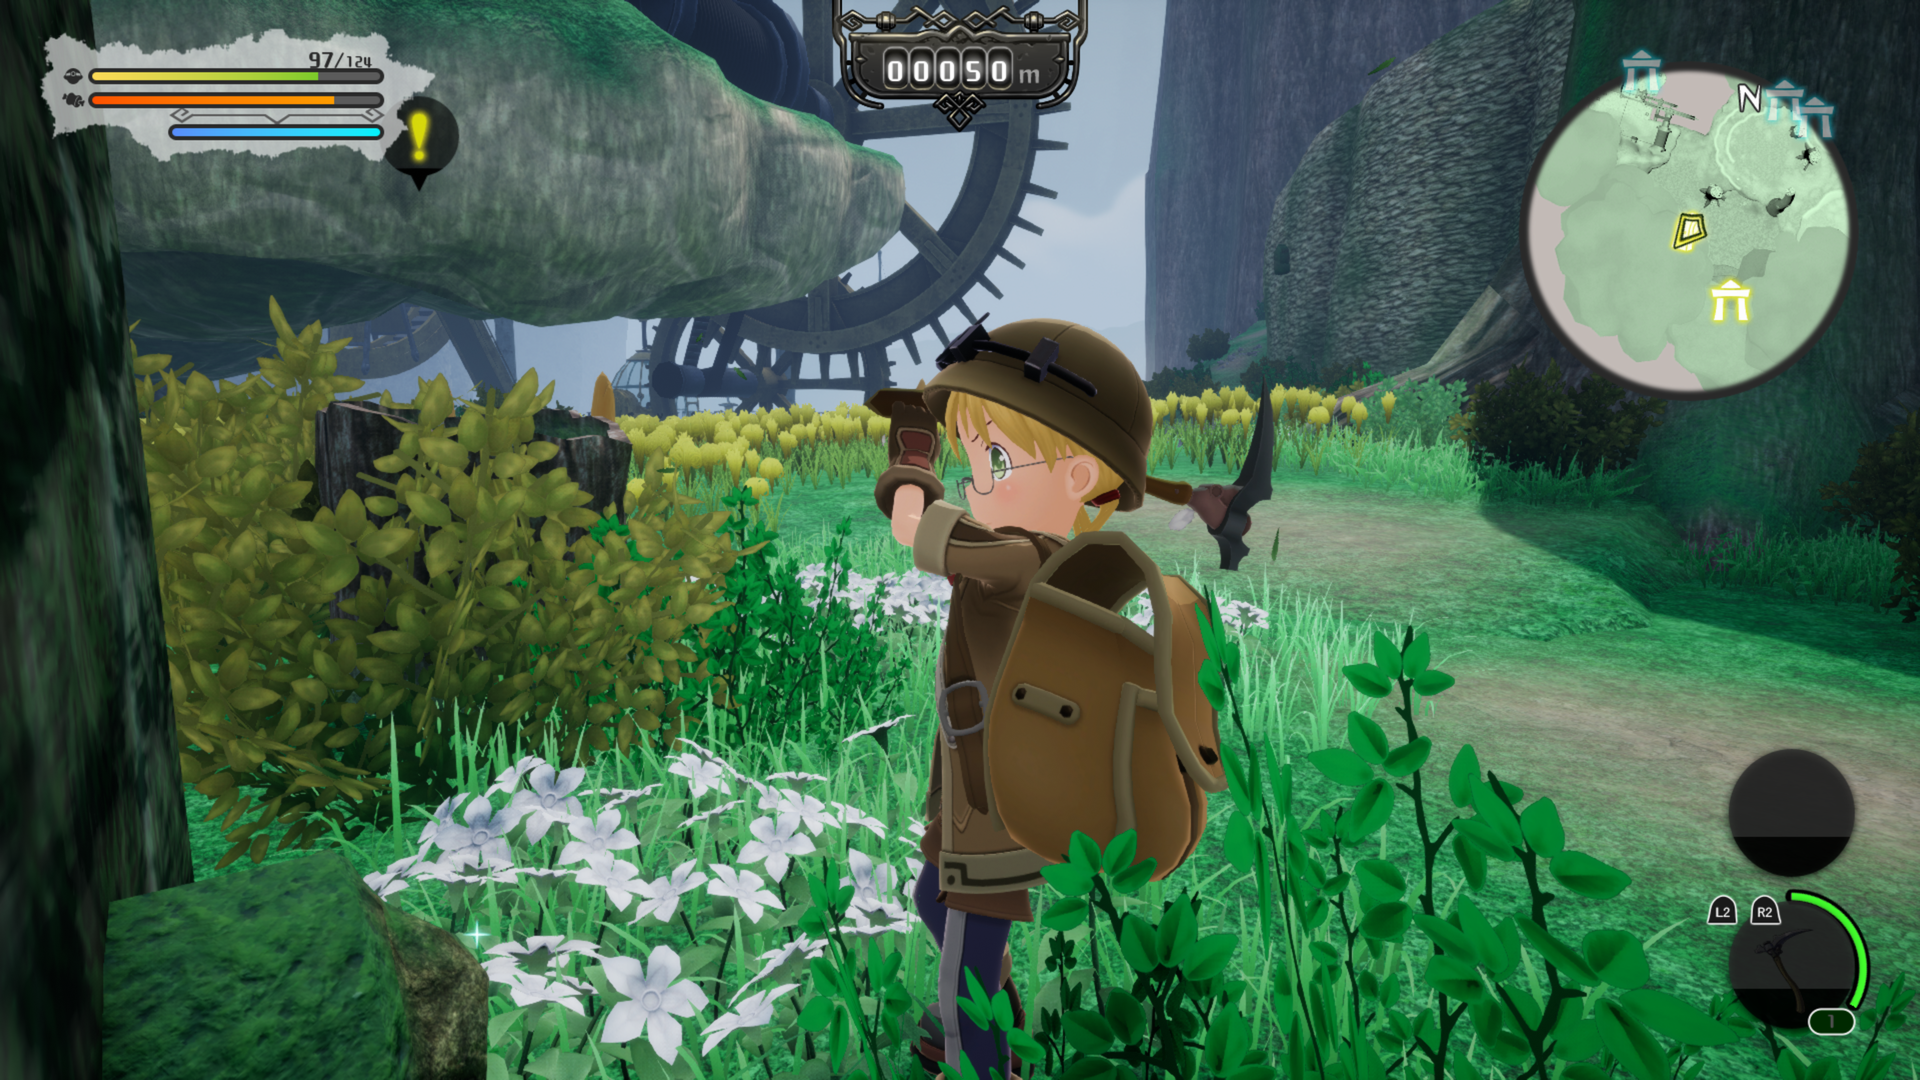 Enjoy the World of Made in Abyss with Two Game Modes - Spike Chunsoft